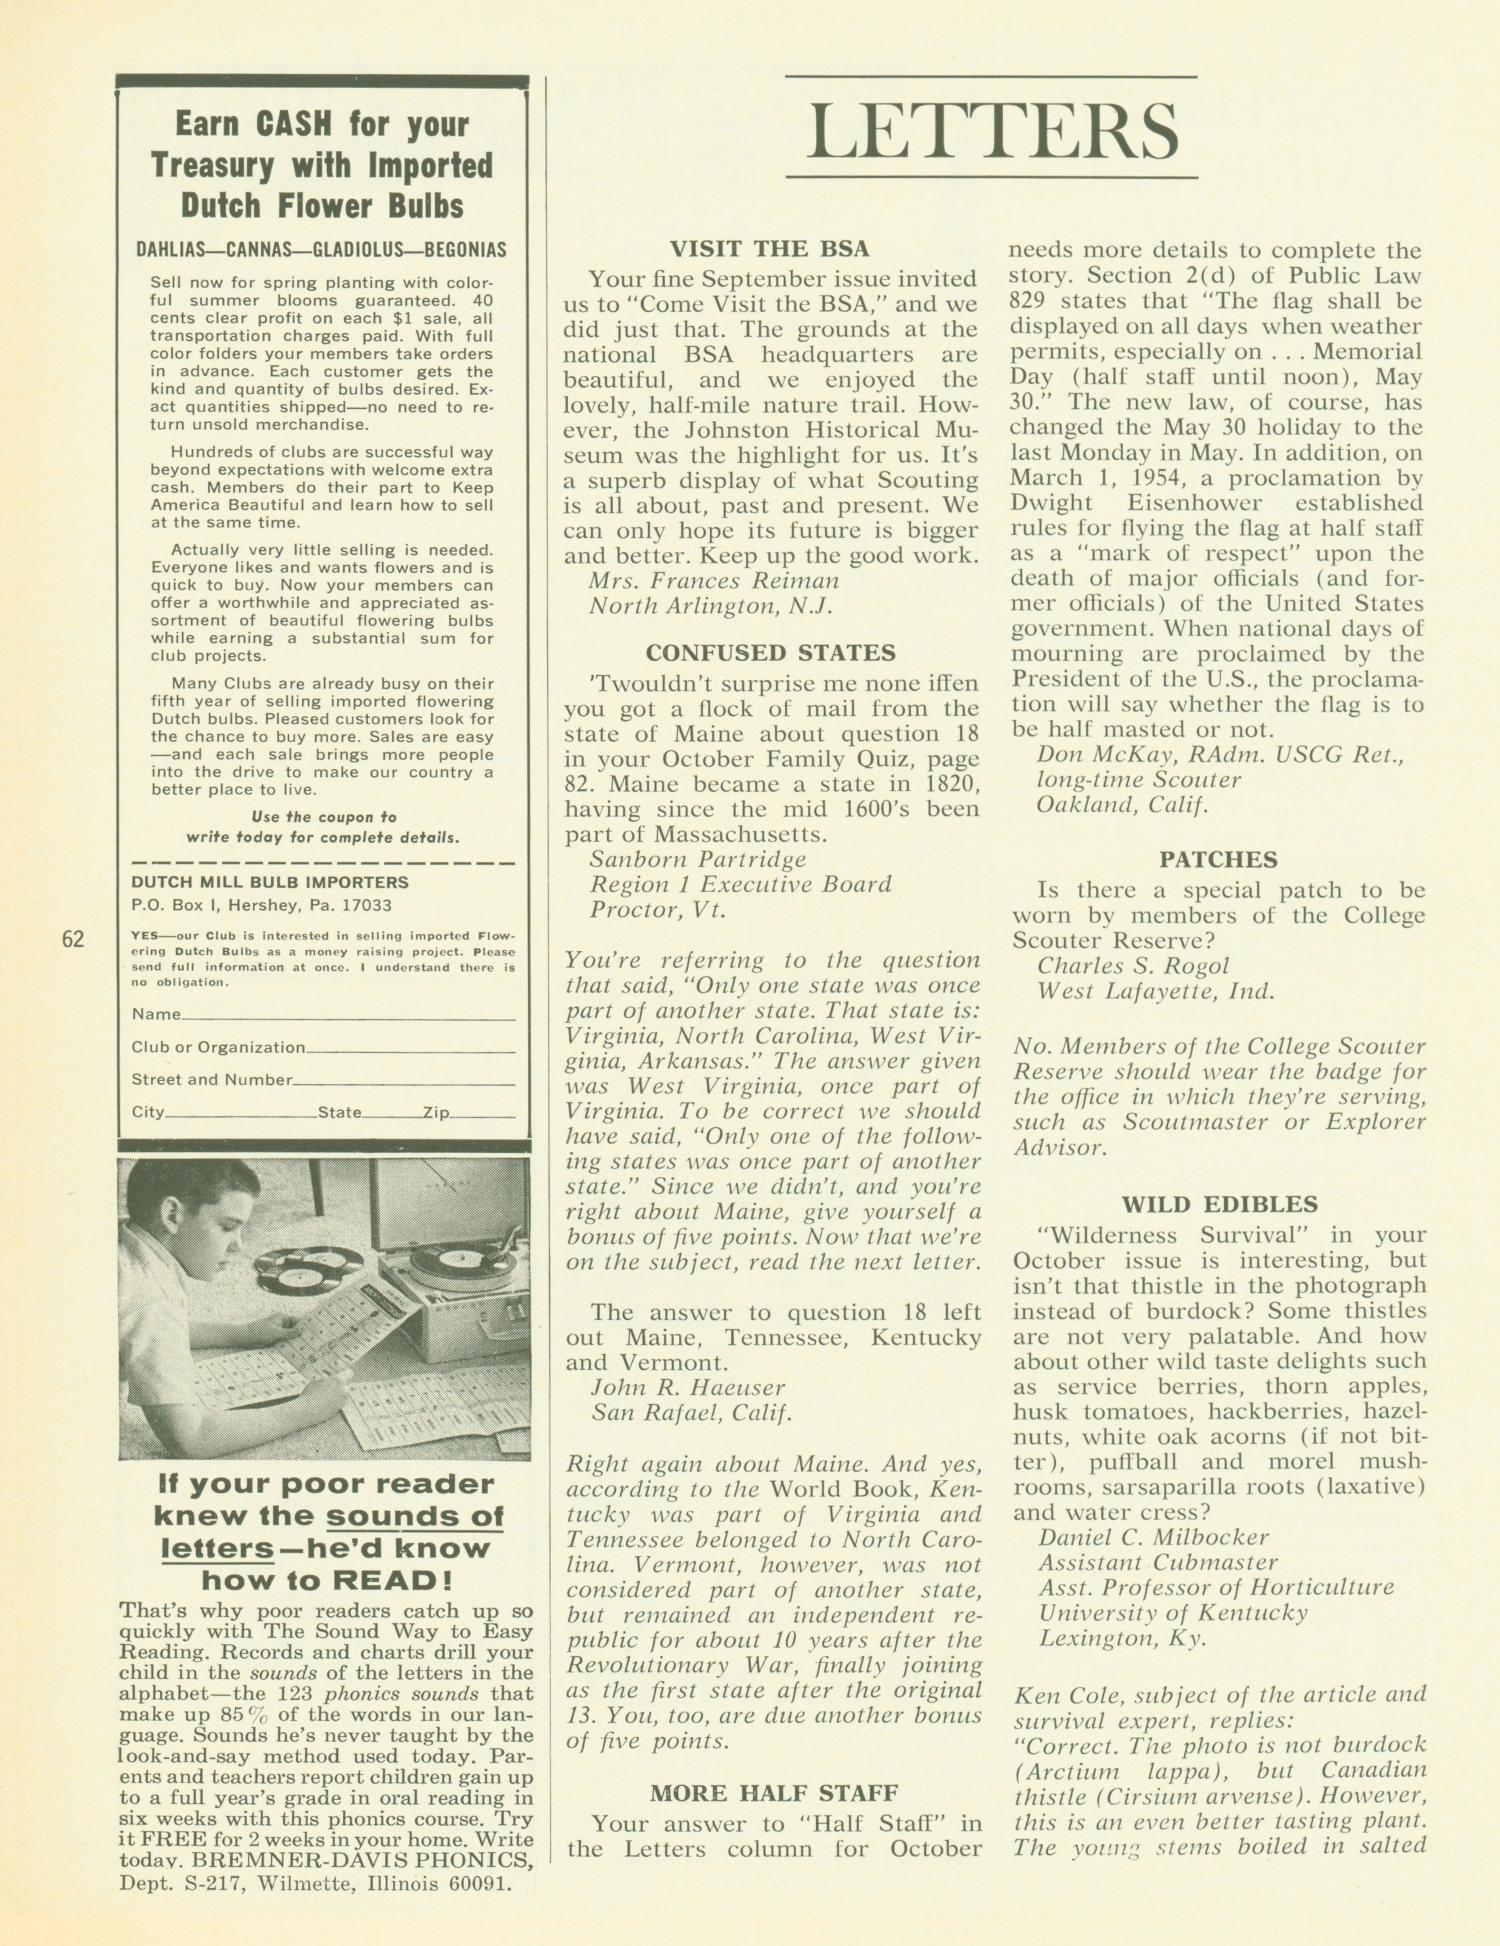 Scouting, Volume 60, Number 1, January-February 1972
                                                
                                                    62
                                                